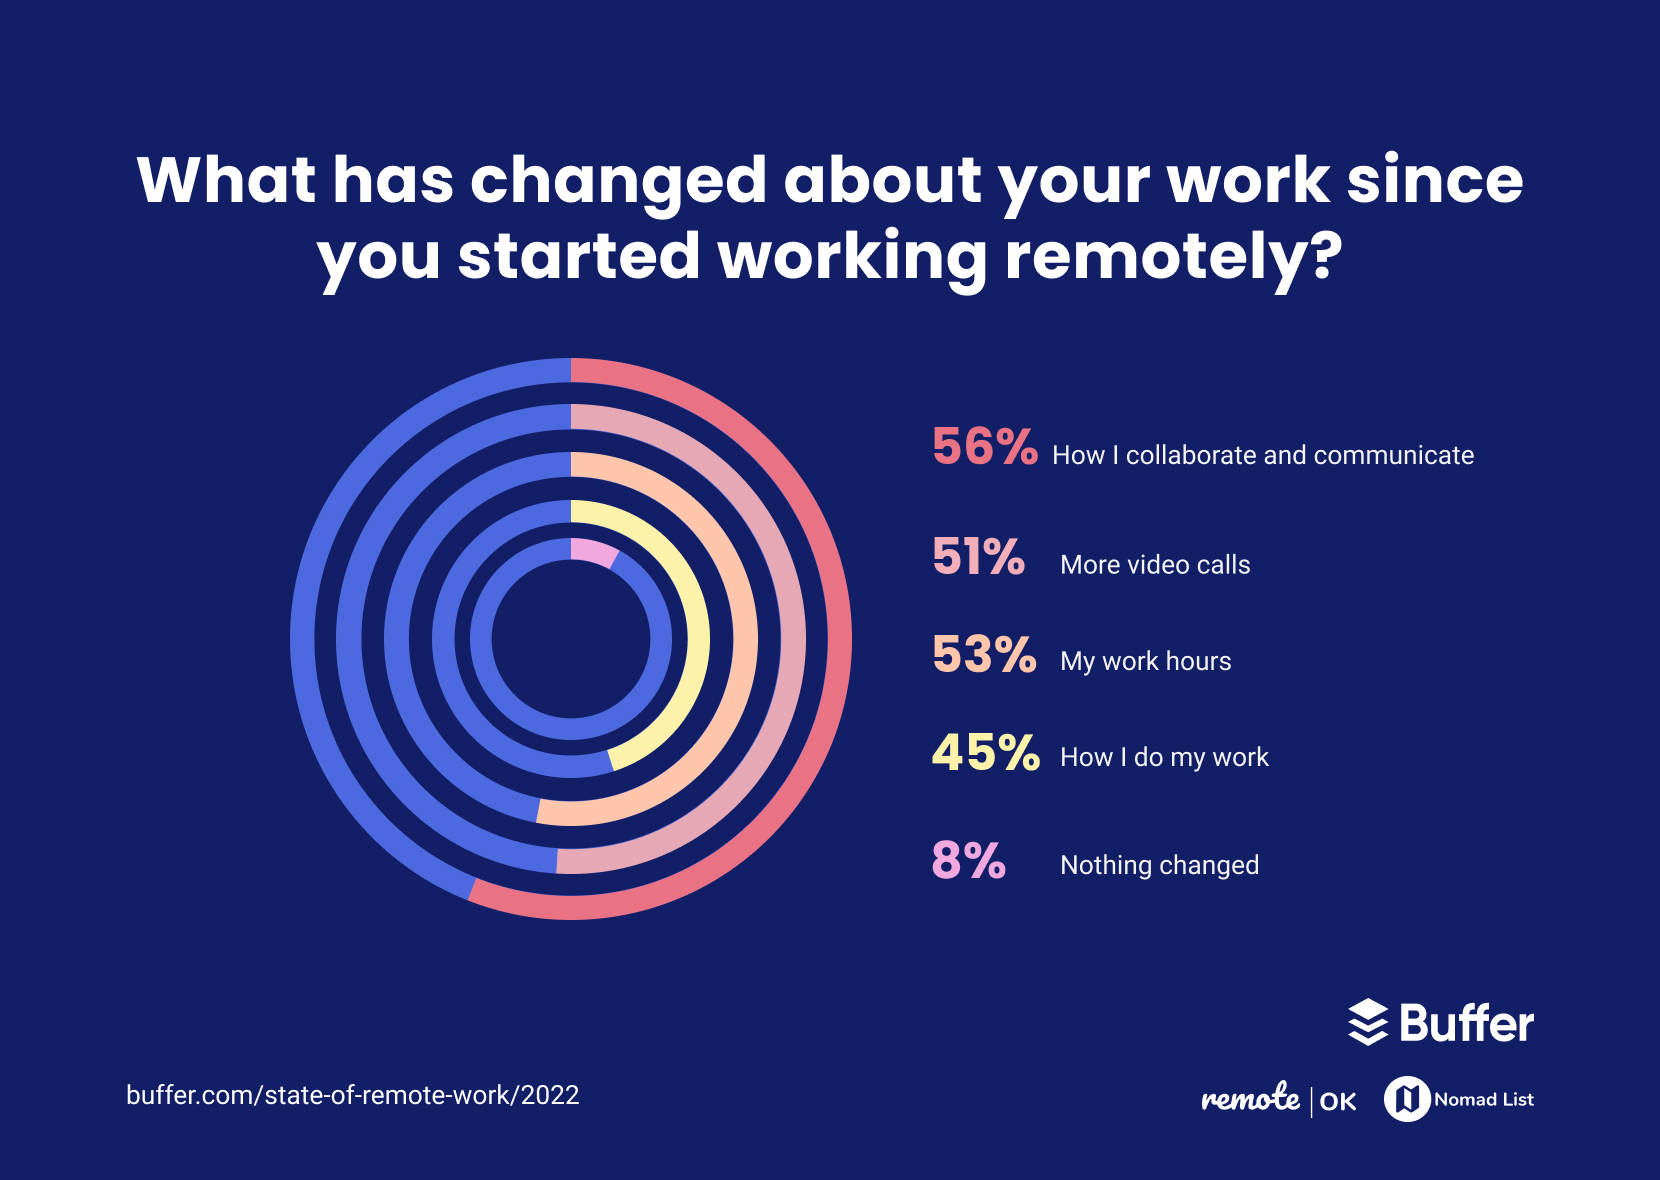 What has changed about your work since you started working remotely?